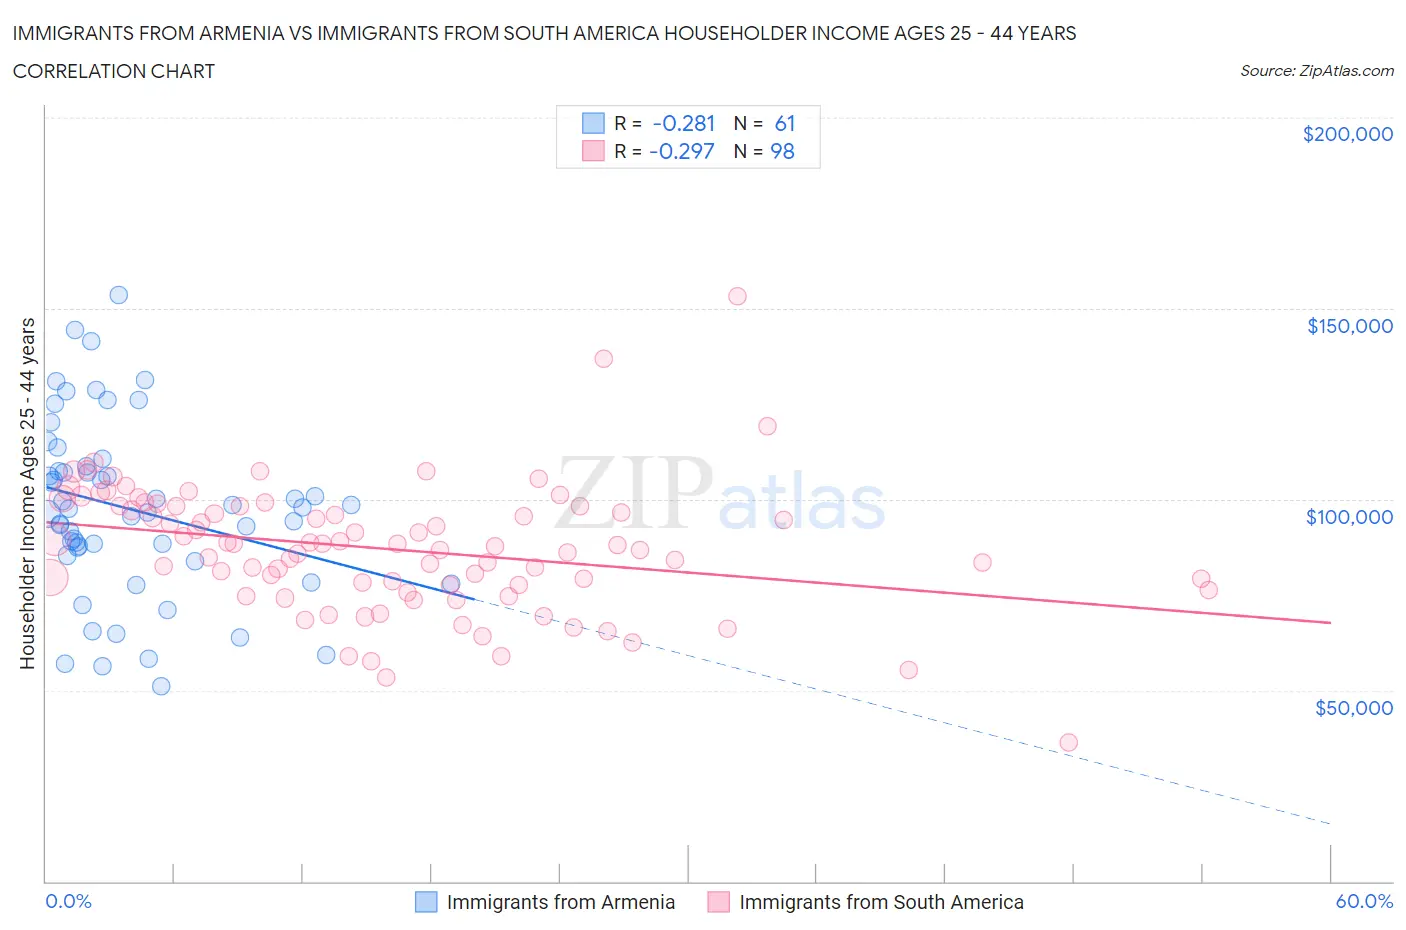 Immigrants from Armenia vs Immigrants from South America Householder Income Ages 25 - 44 years